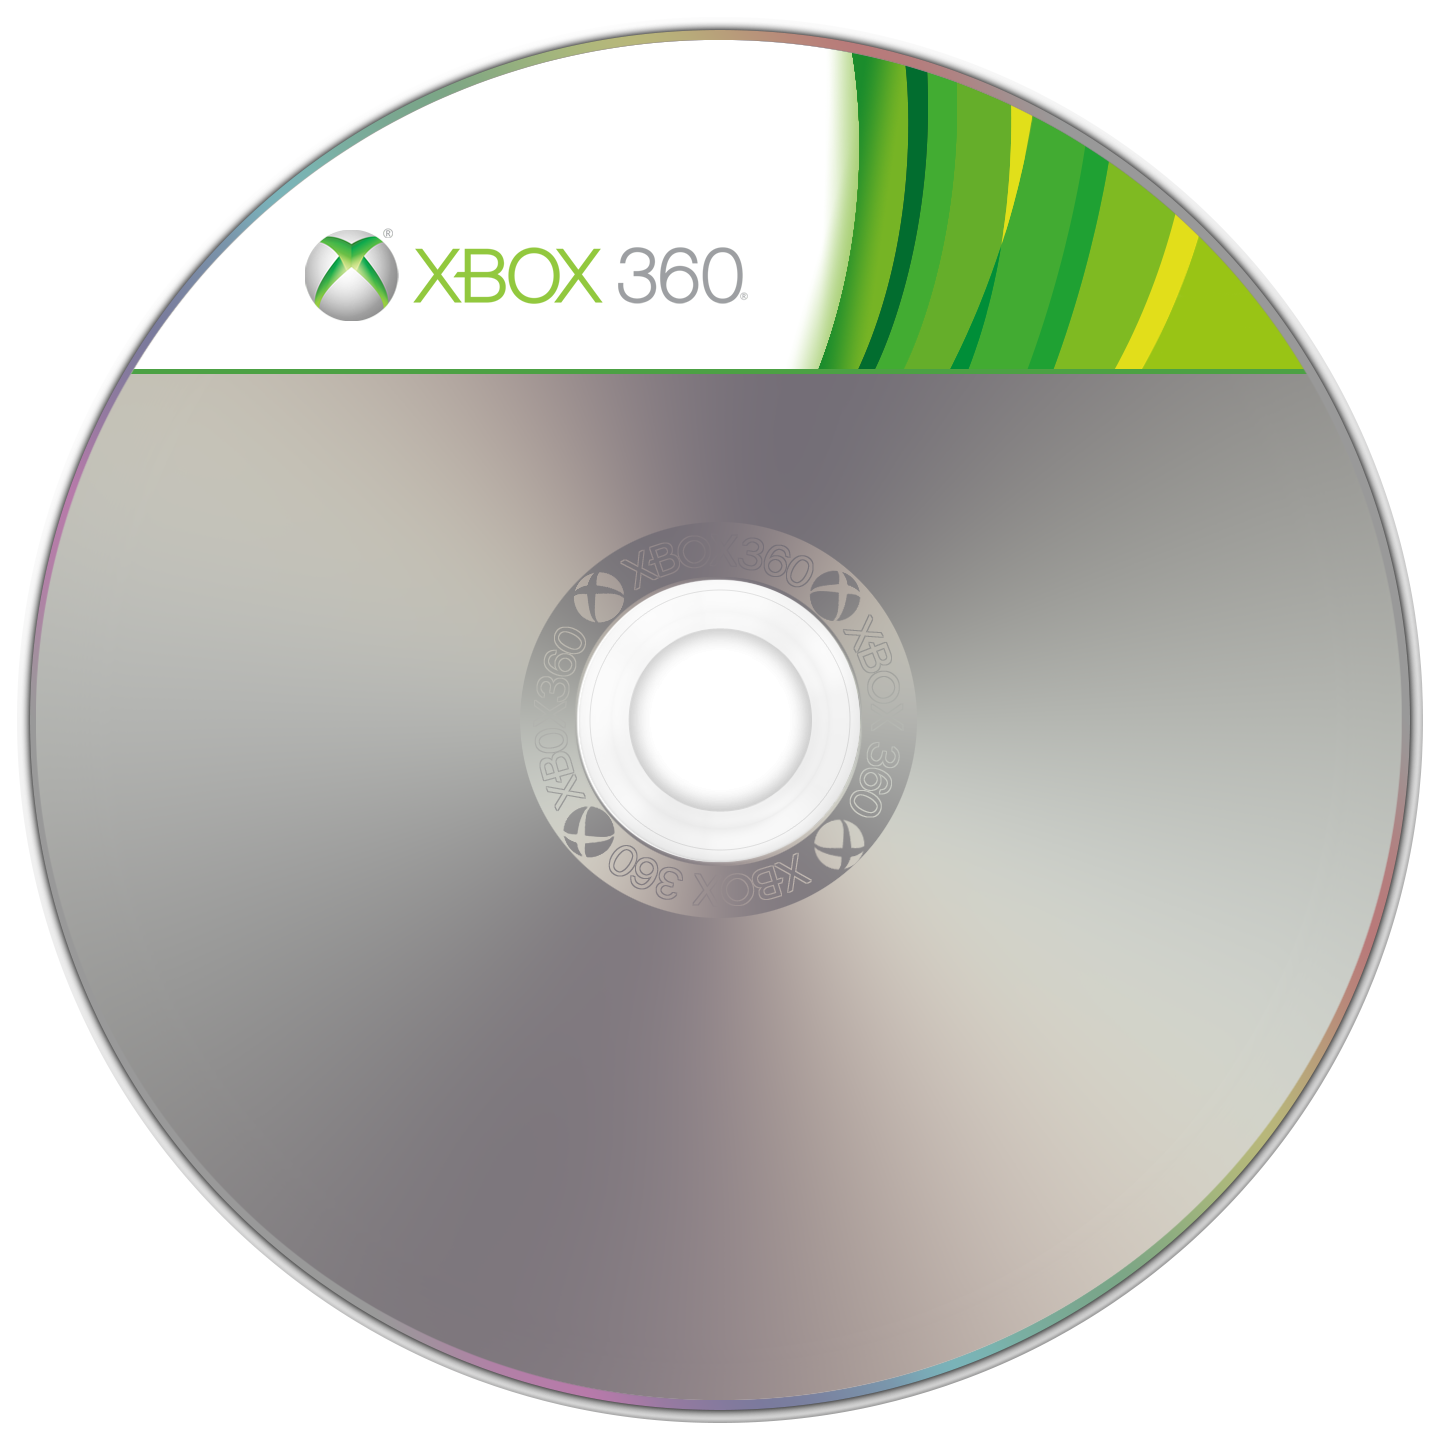 More information about "Xbox 360 Template Disc"